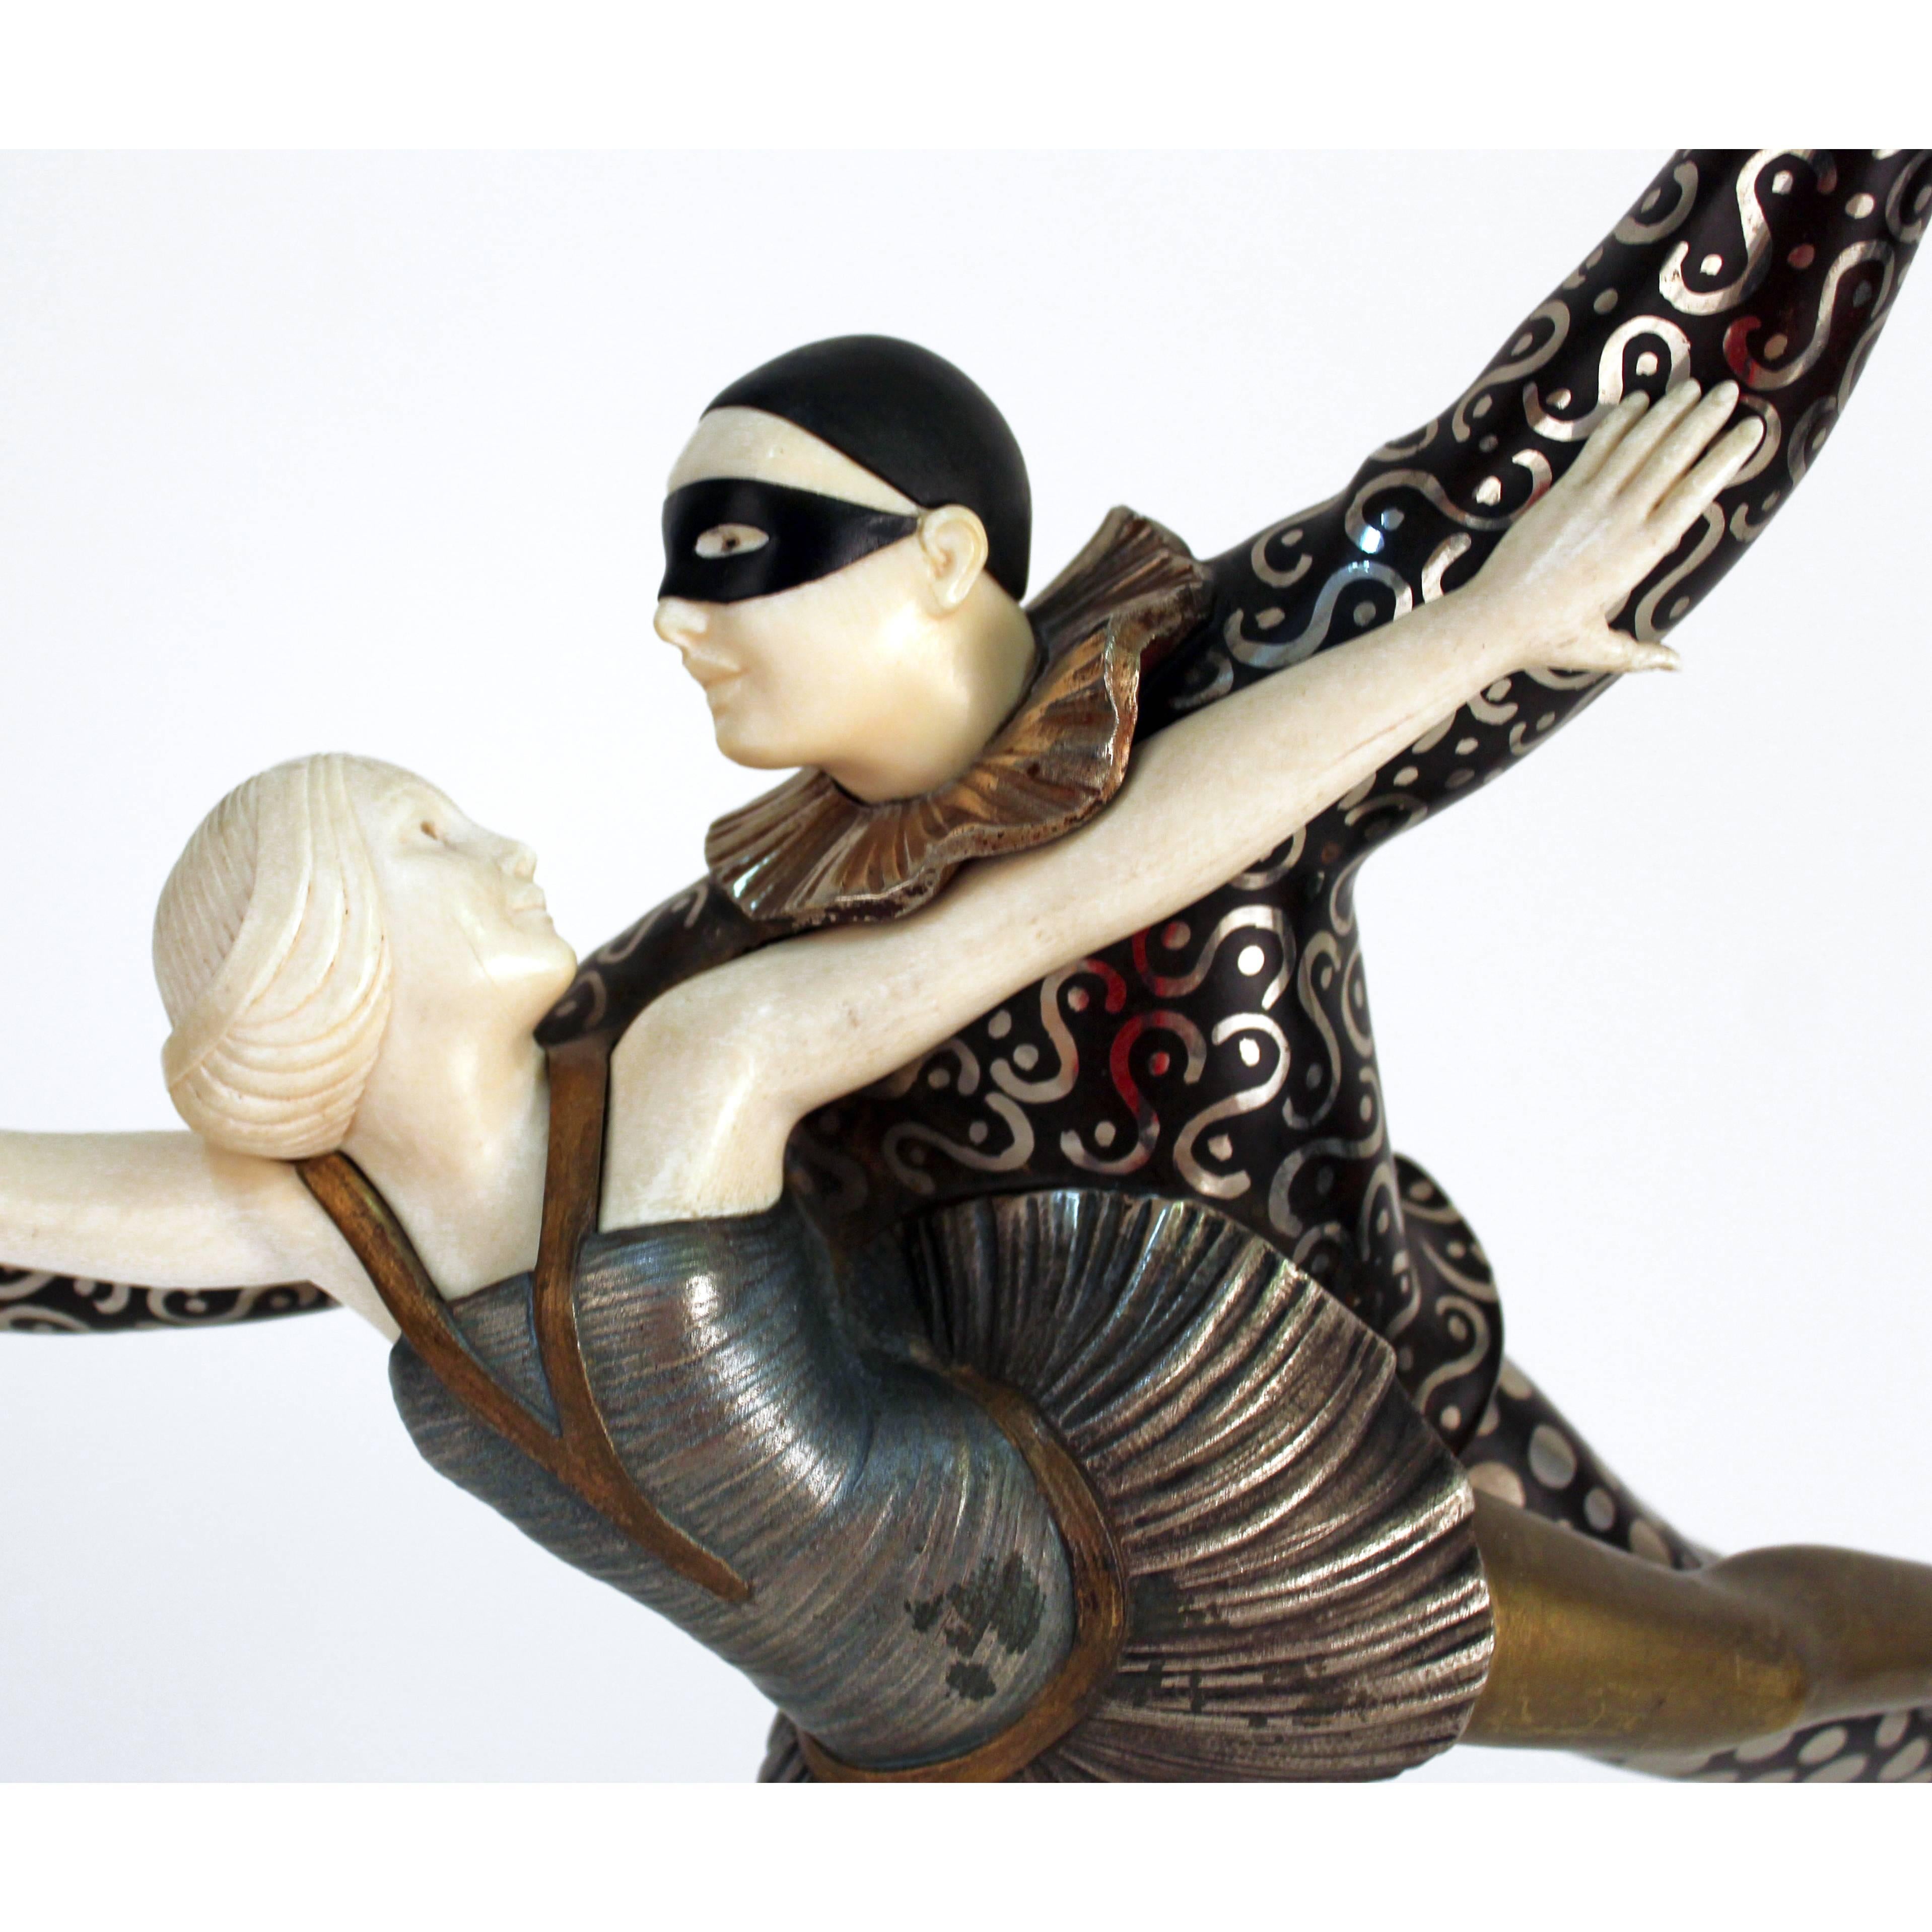 Art Deco silvered, patinated bronze sculpture by the French artist Alexander Keletey with beige onyx vase depicting a couple of dancer wearing a festive costume.
Made in France
circa 1930
Signature: A. Kelety
Reference: Purchased from Sotheby's